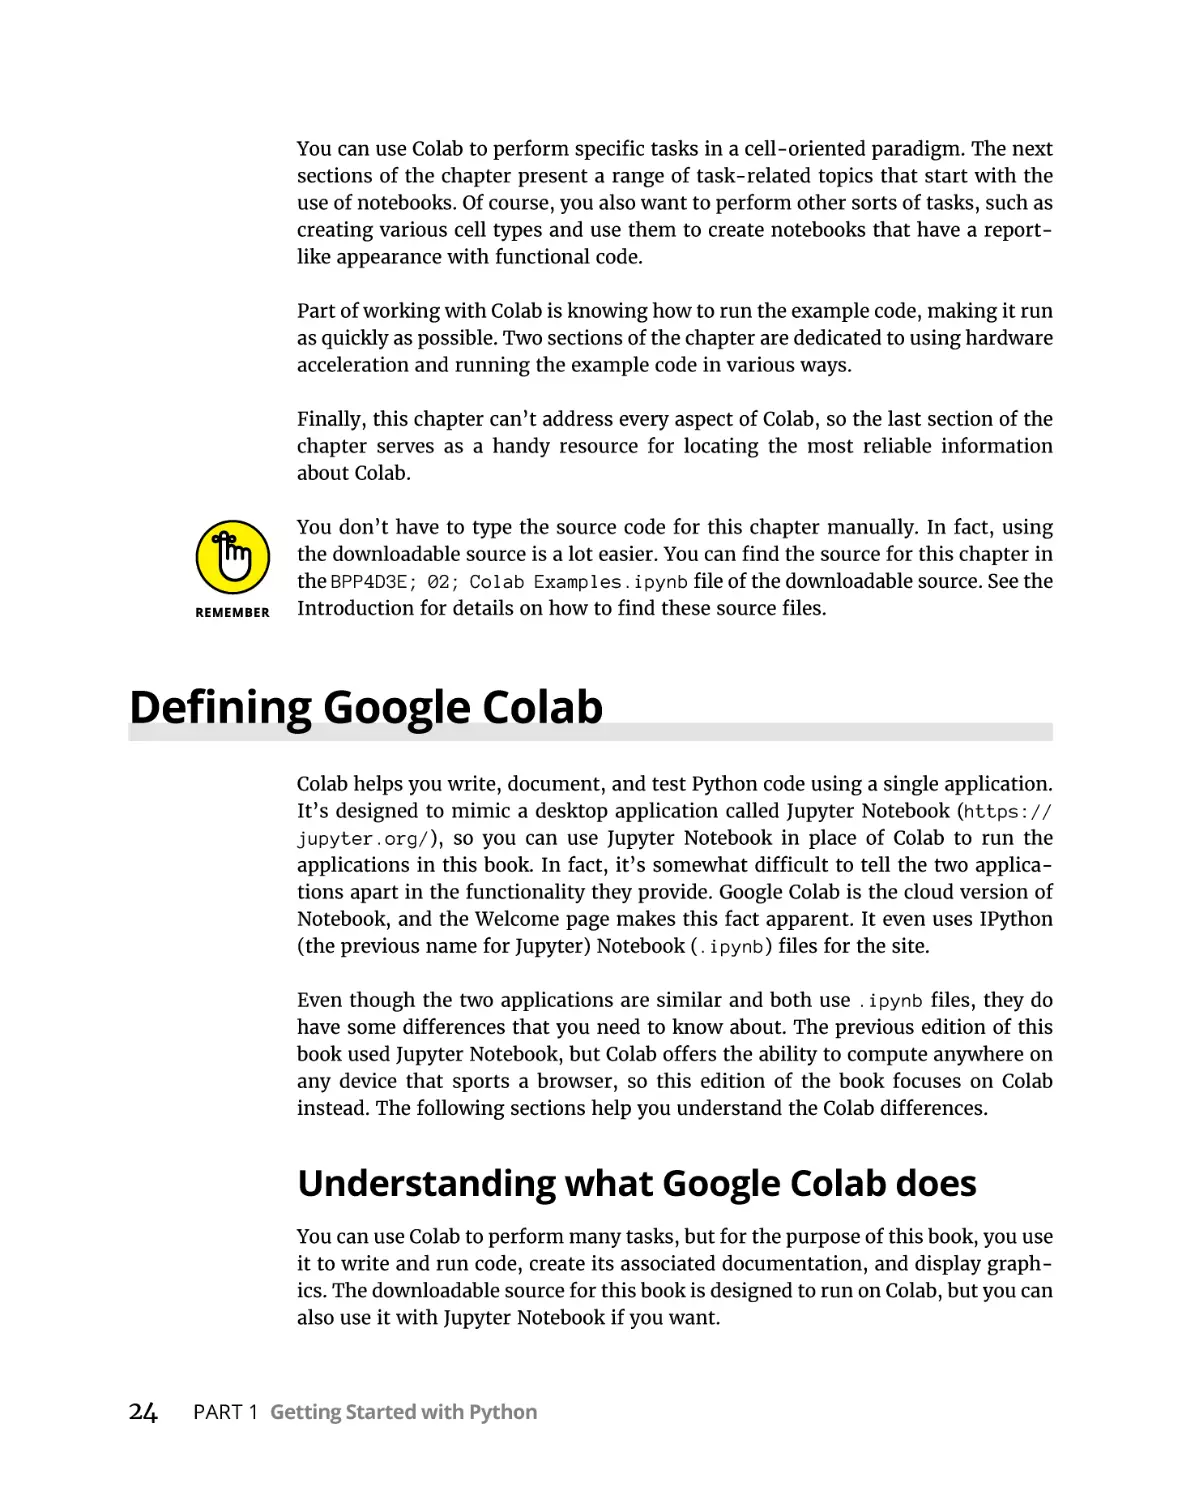 Defining Google Colab
Understanding what Google Colab does